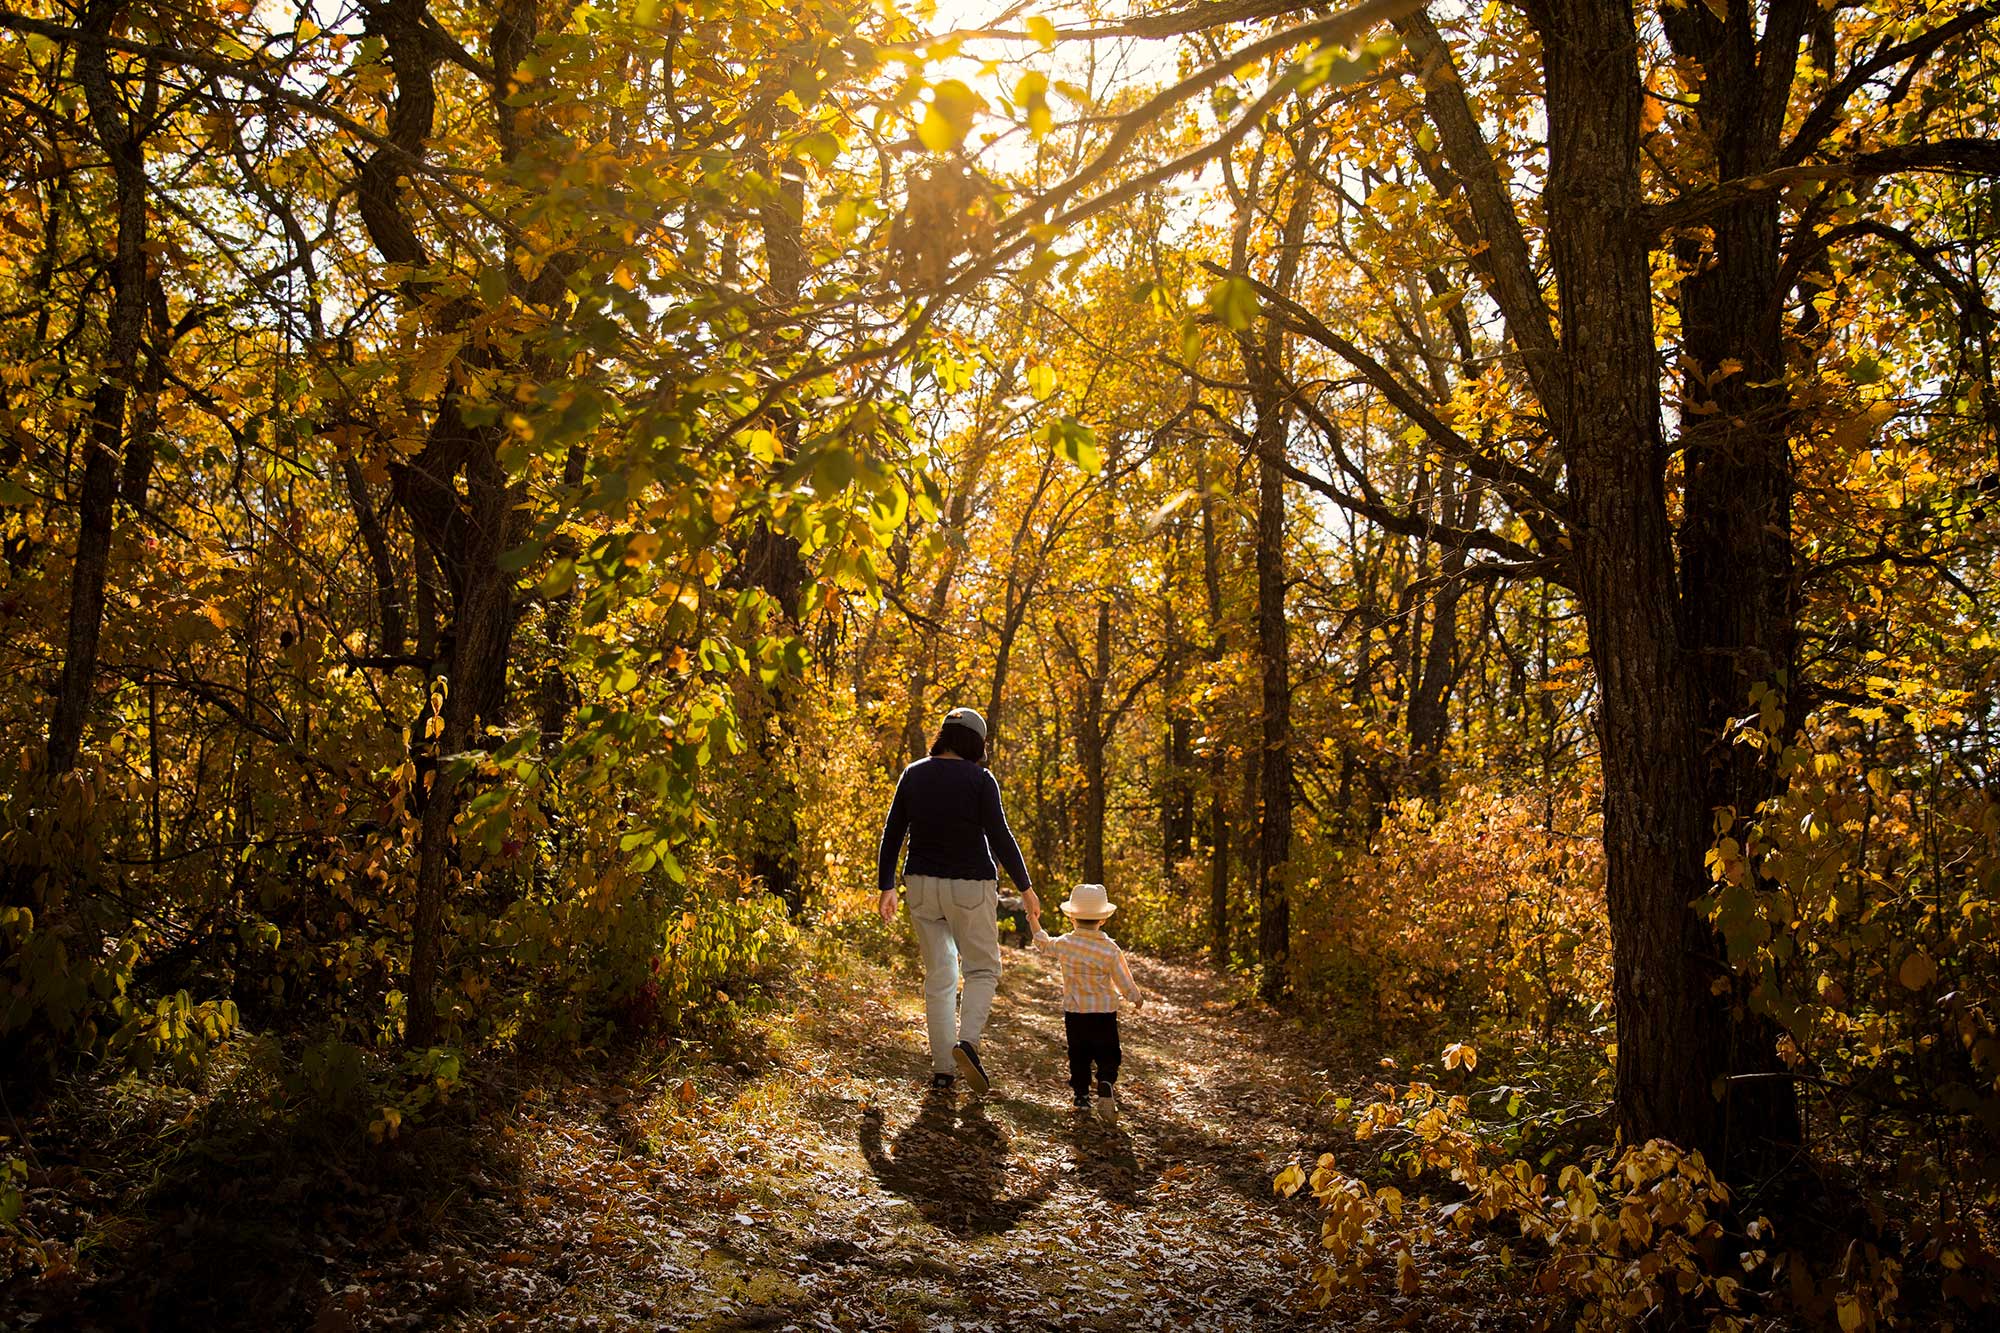 A grandmother and grandchild walk through a forest in Pembina Valley Provincial Park in Manitoba.